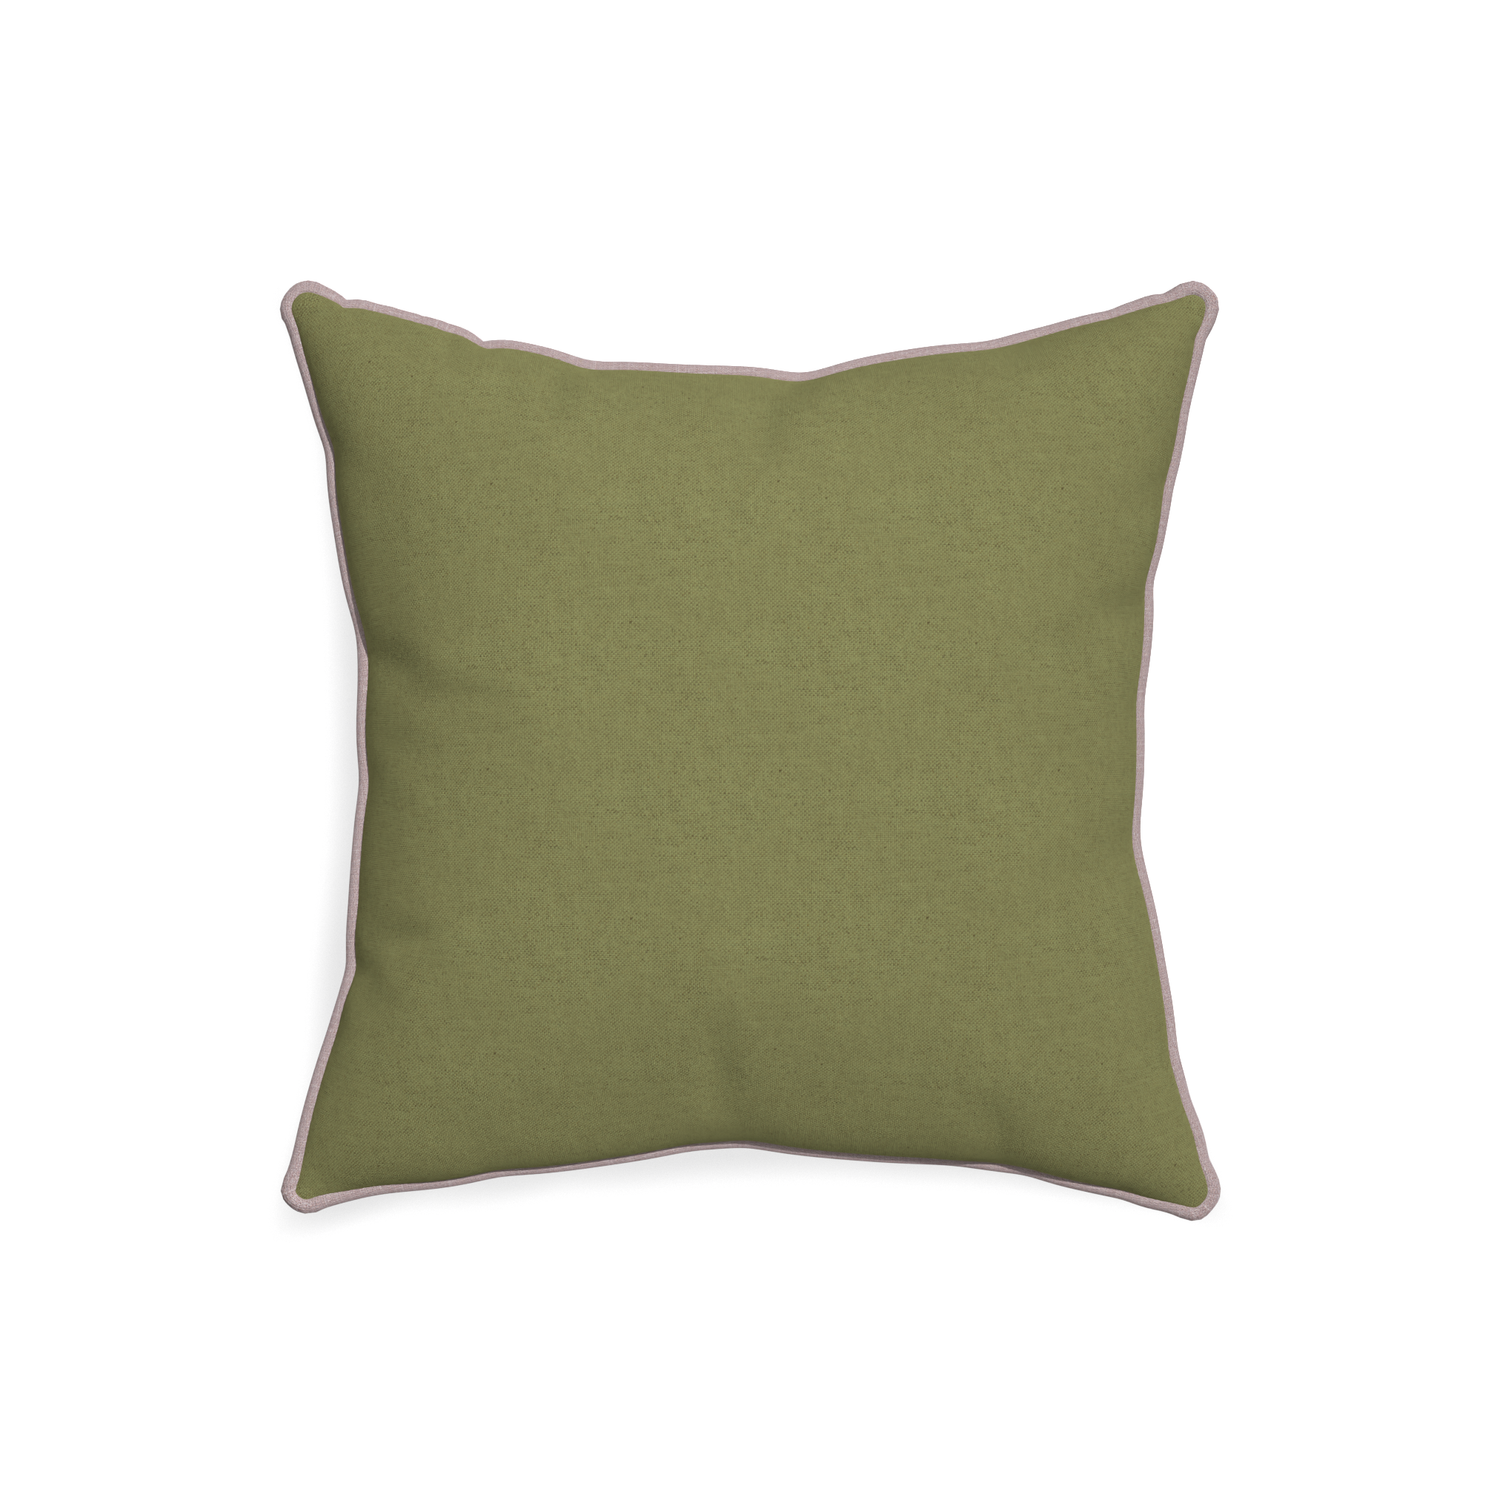 20-square moss custom moss greenpillow with orchid piping on white background